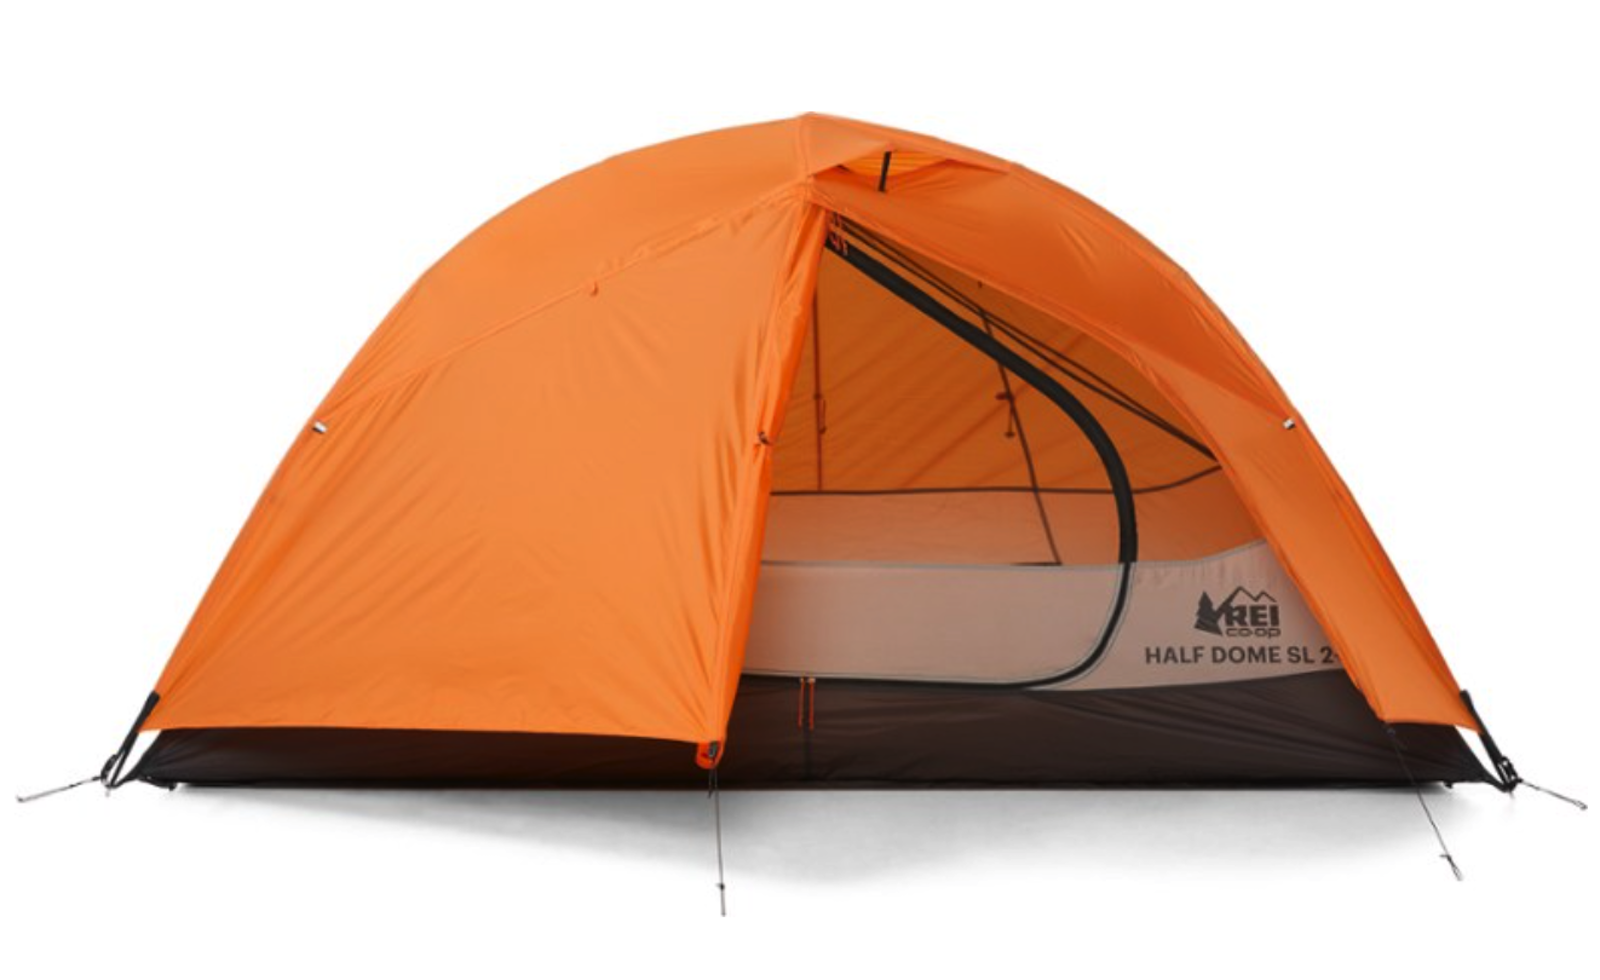 summer backpacking gear guide - tent 